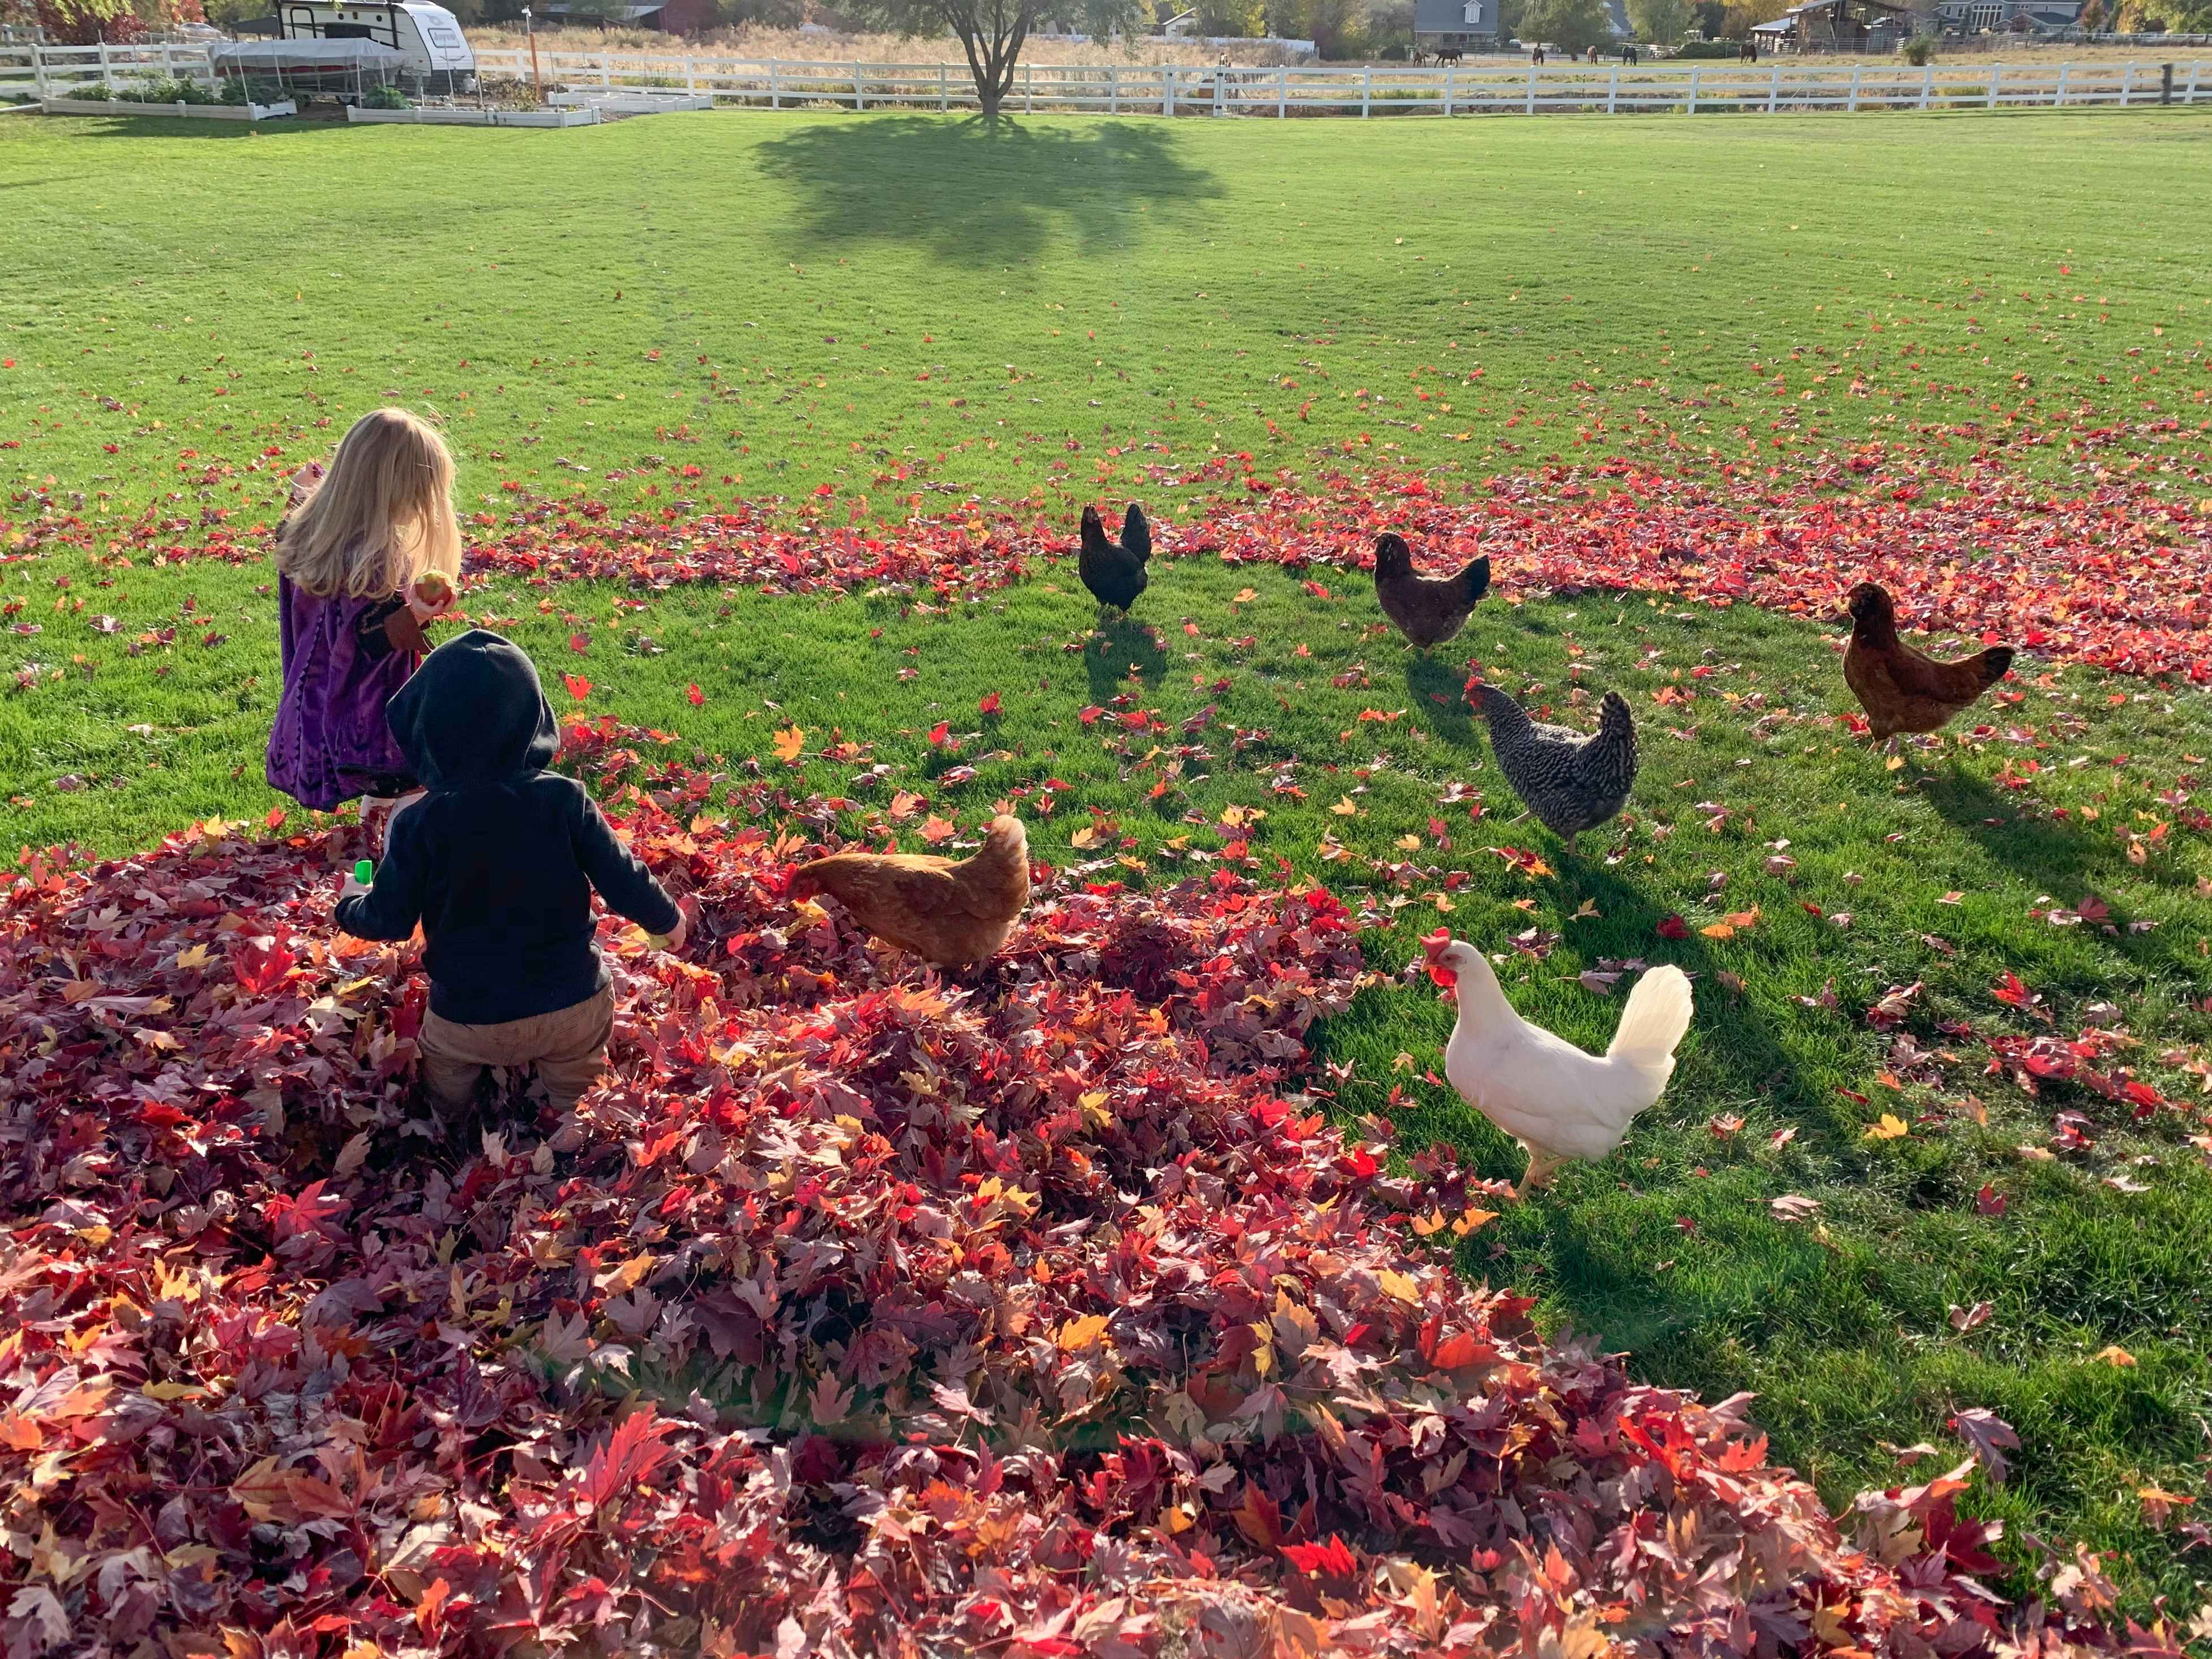 Children playing in the leaves with some chickens walking around on the grass